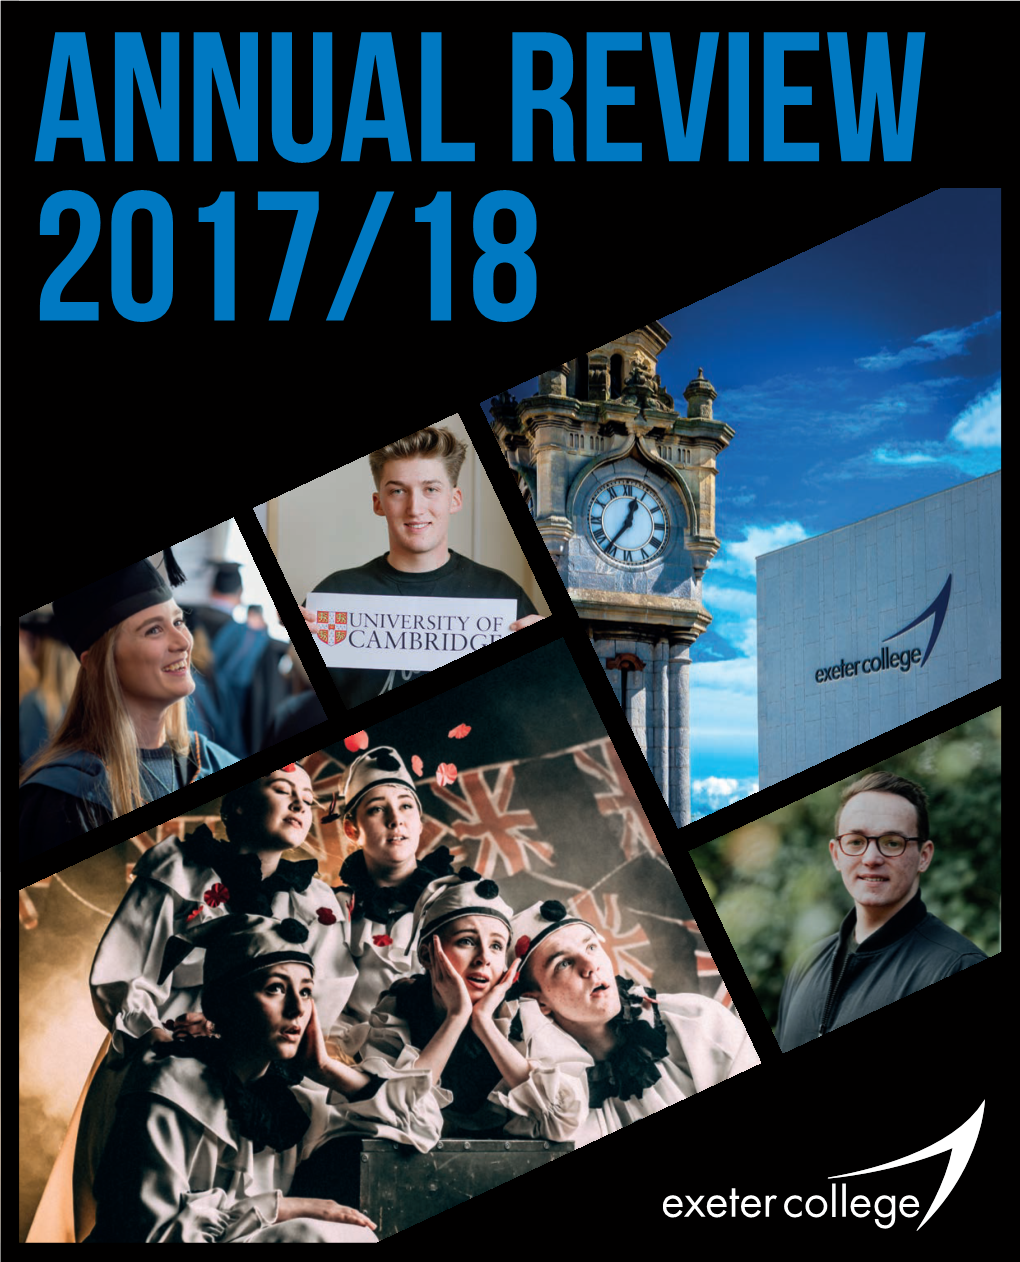 Exeter-College-Annual-Review-2017